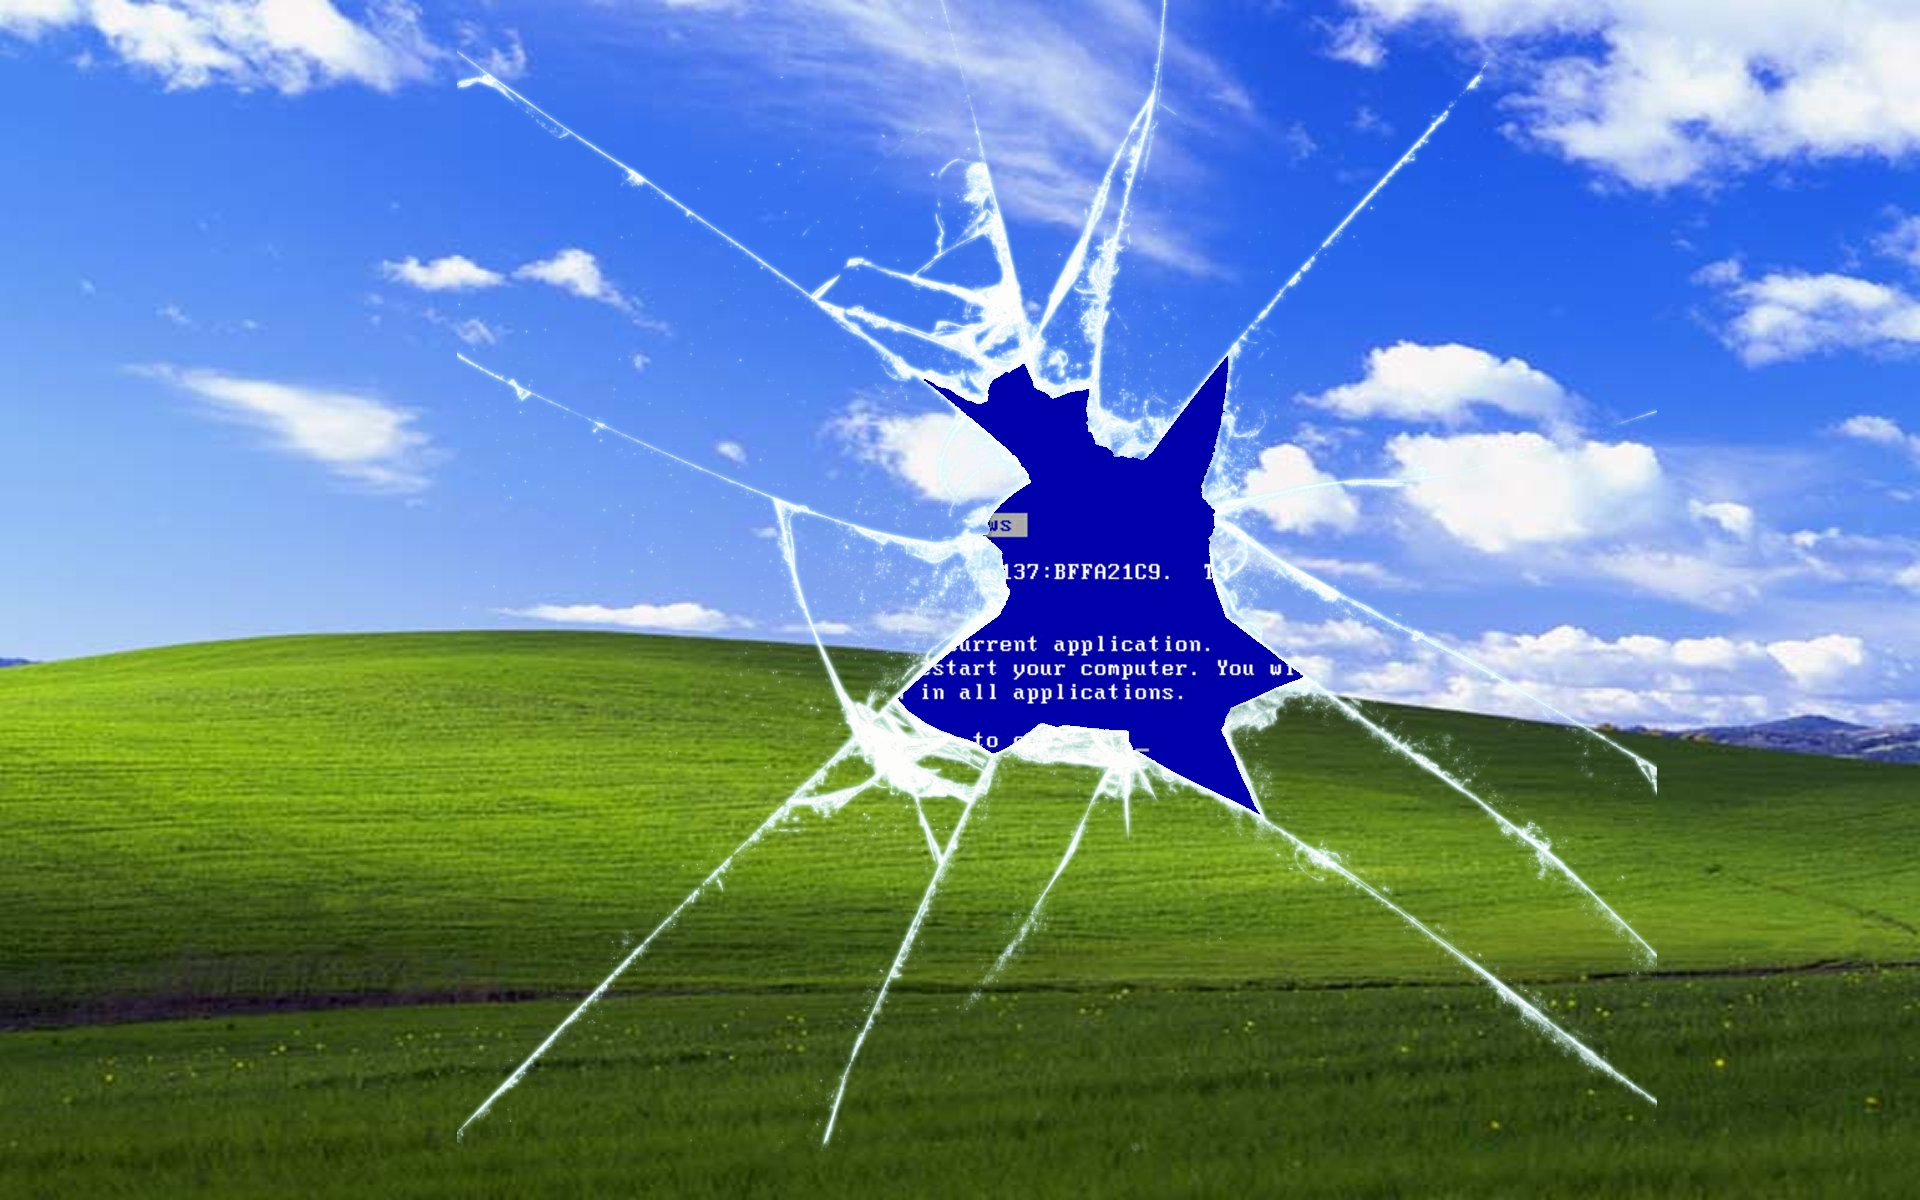 The Best Takes On Windows Xp Bliss Wallpaper Dorkly Post